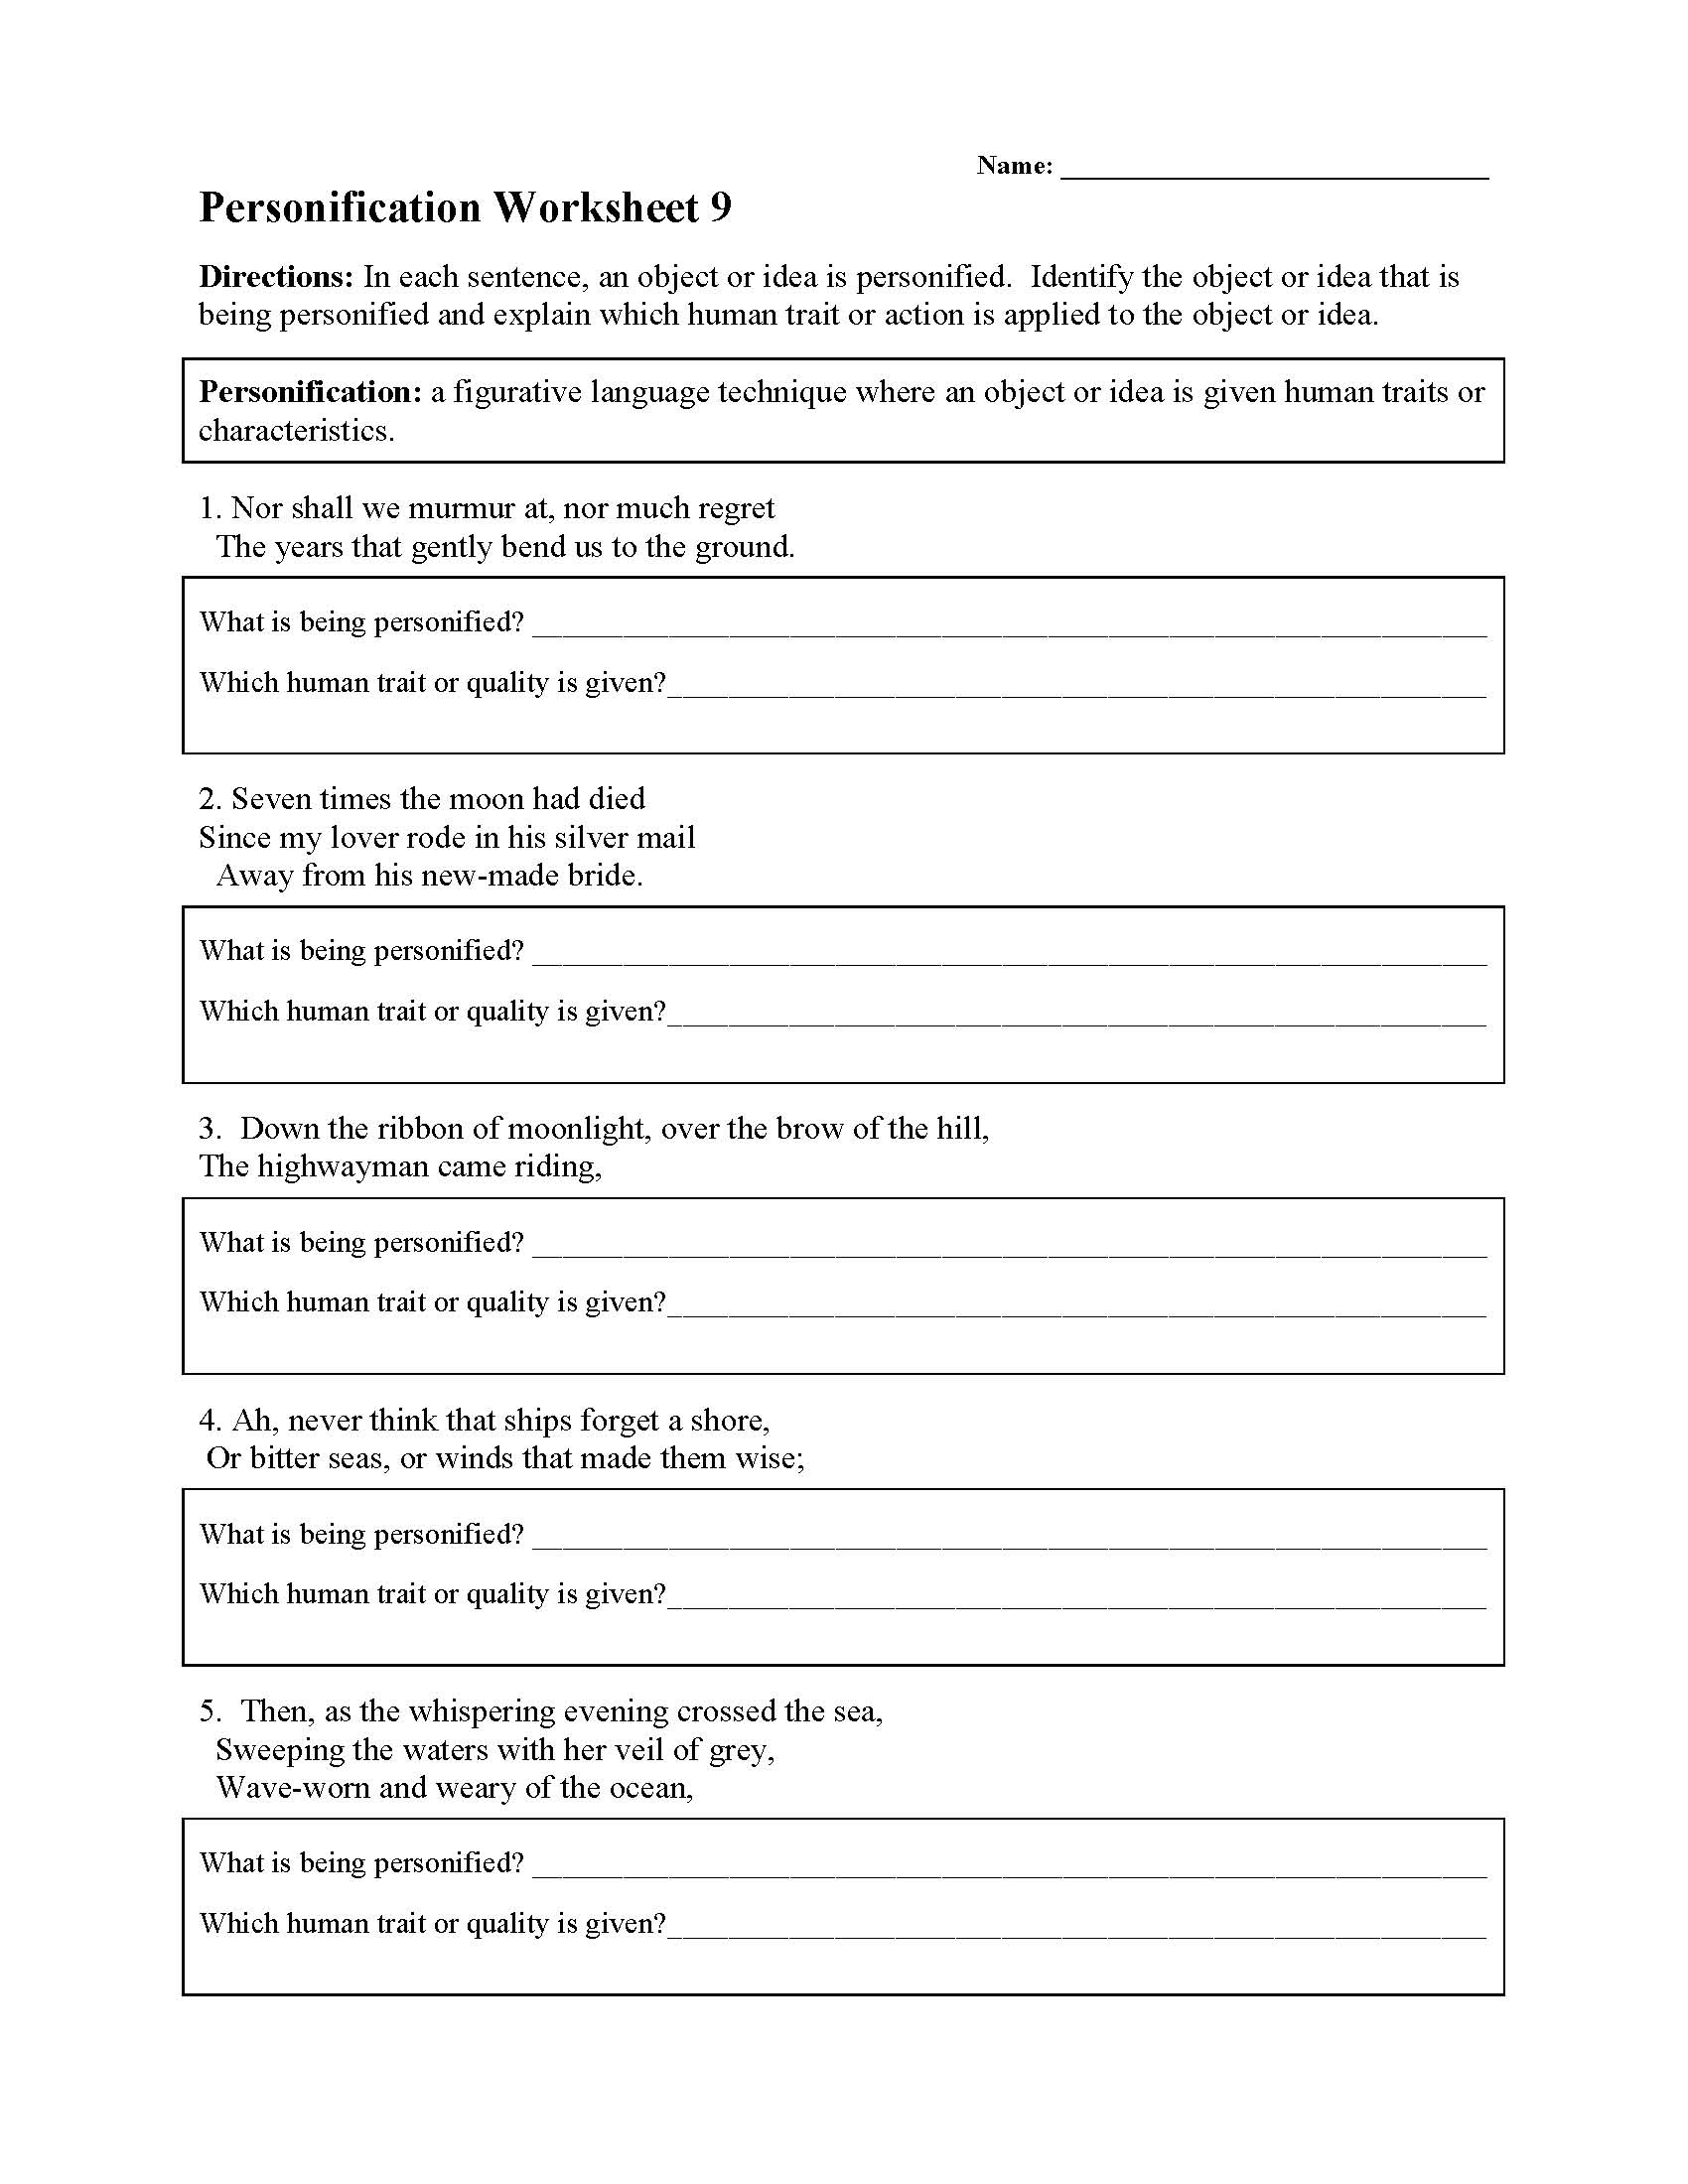 Personification Worksheet Answers